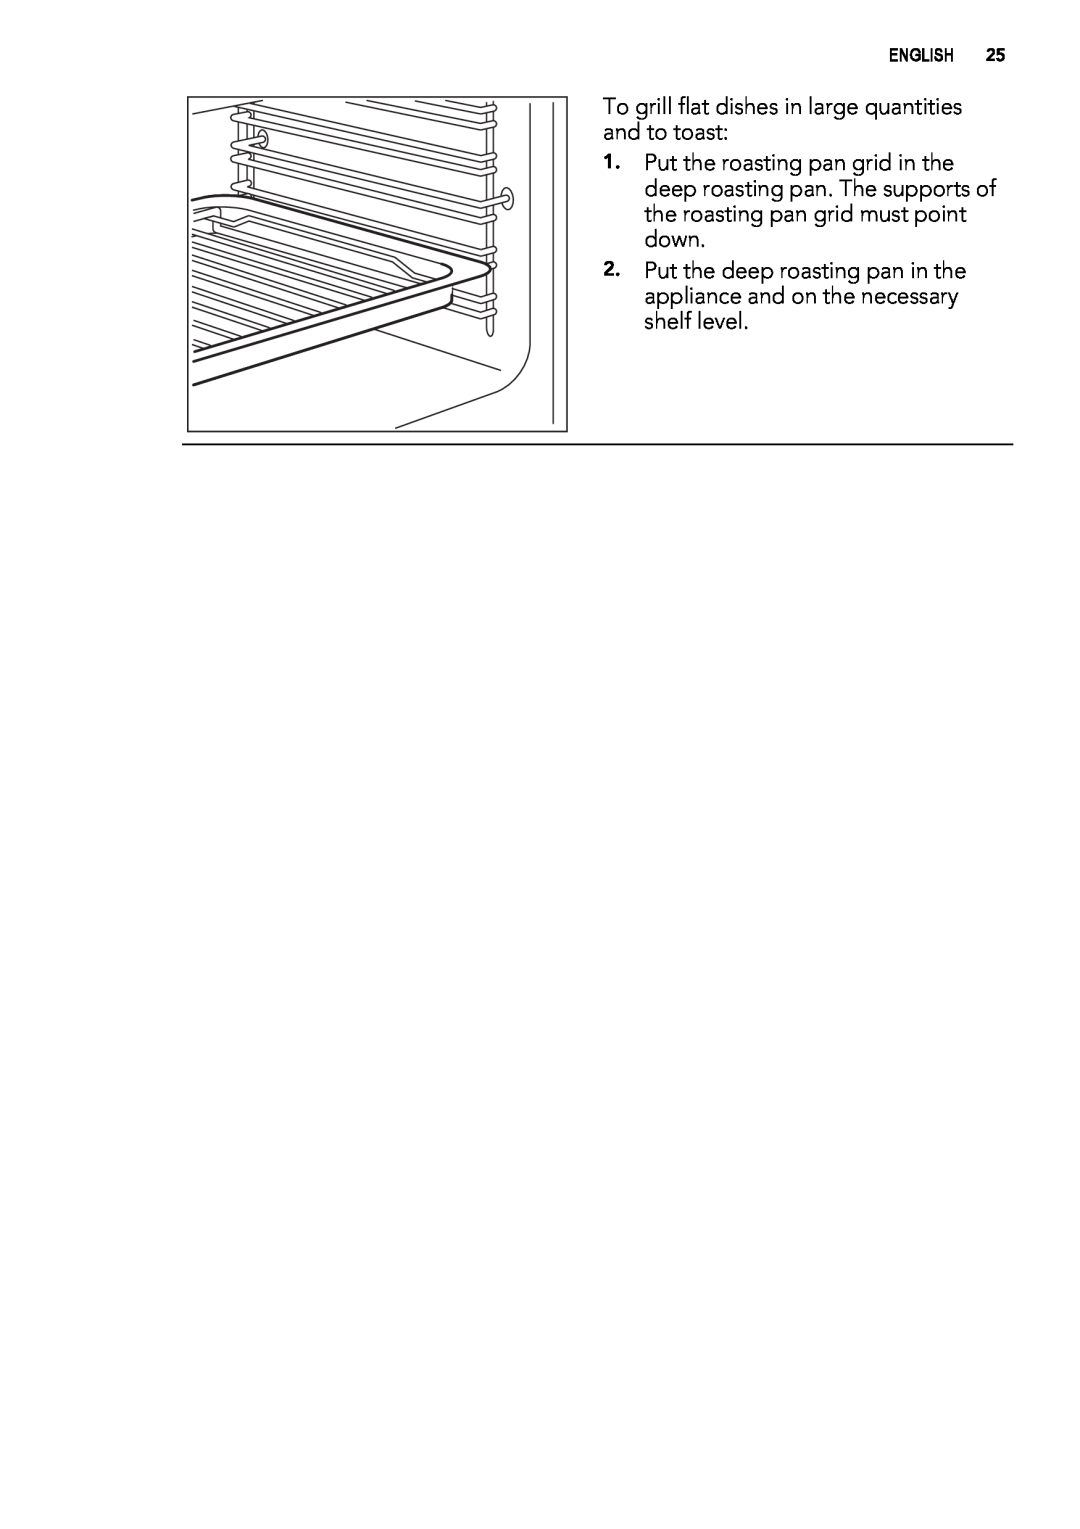 AEG 49332I-MN user manual To grill flat dishes in large quantities and to toast 